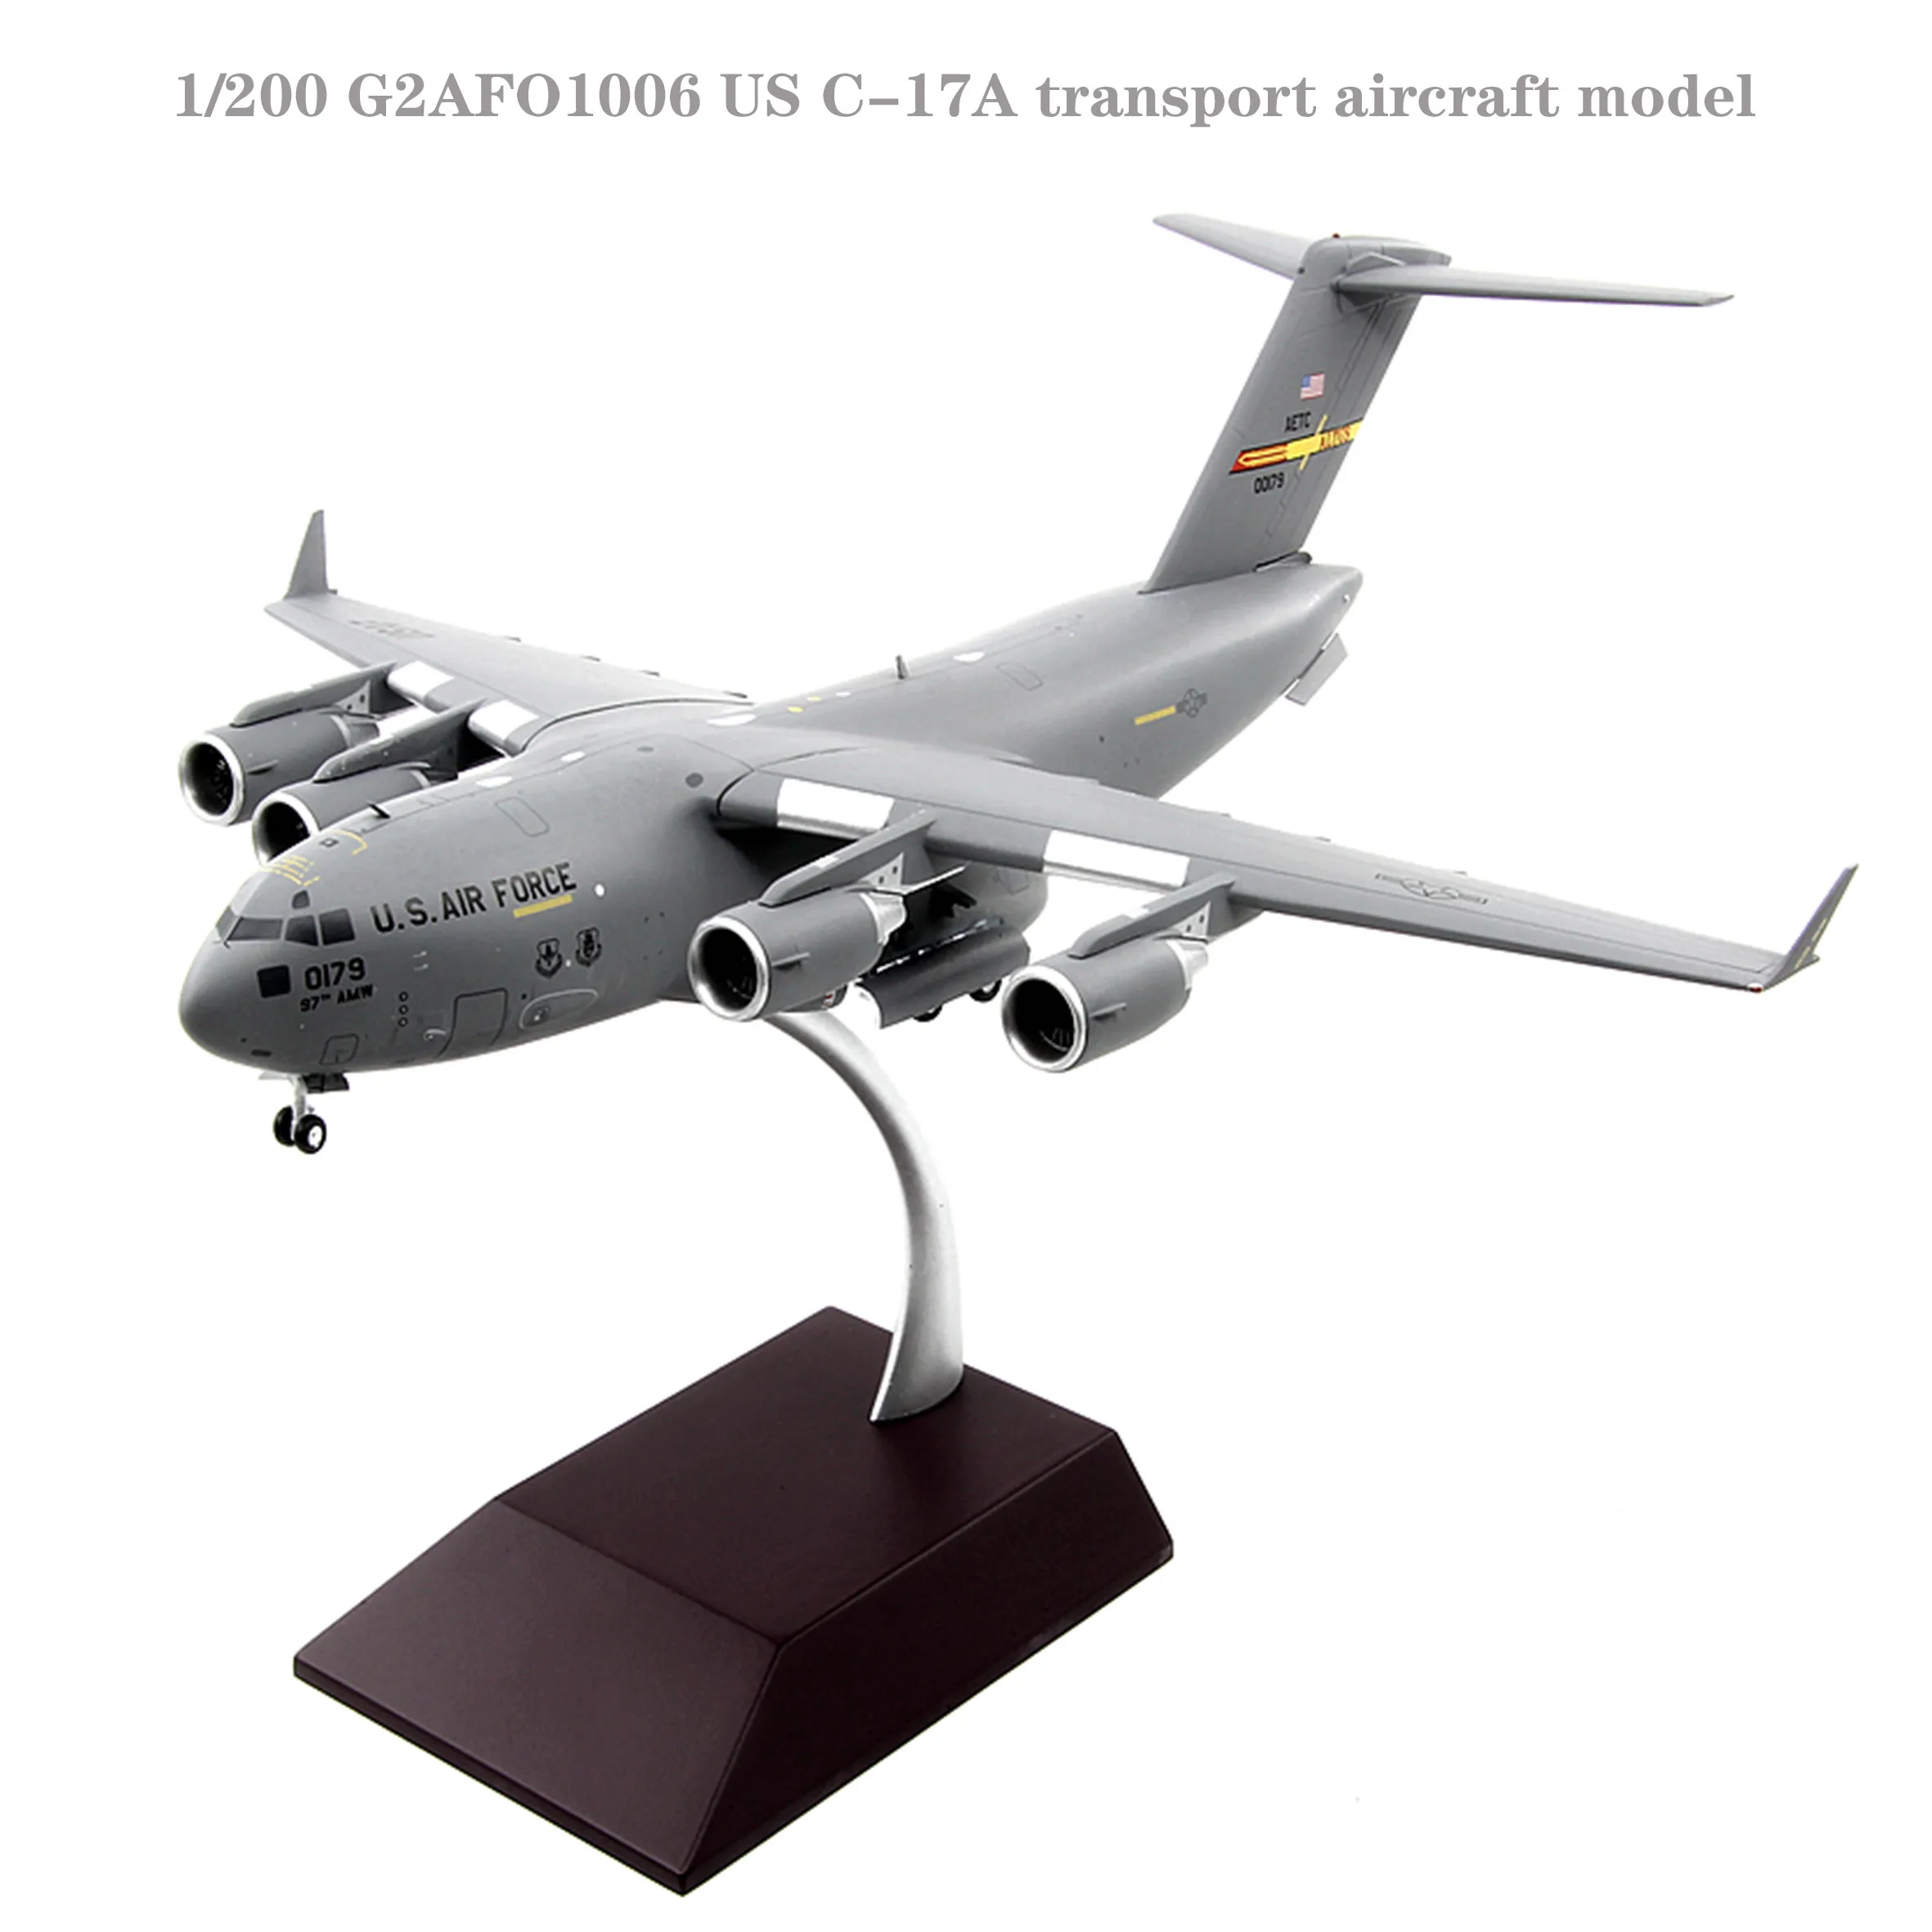 

Fine 1/200 G2AFO1006 US C-17A transport aircraft model Alloy finished product collection model